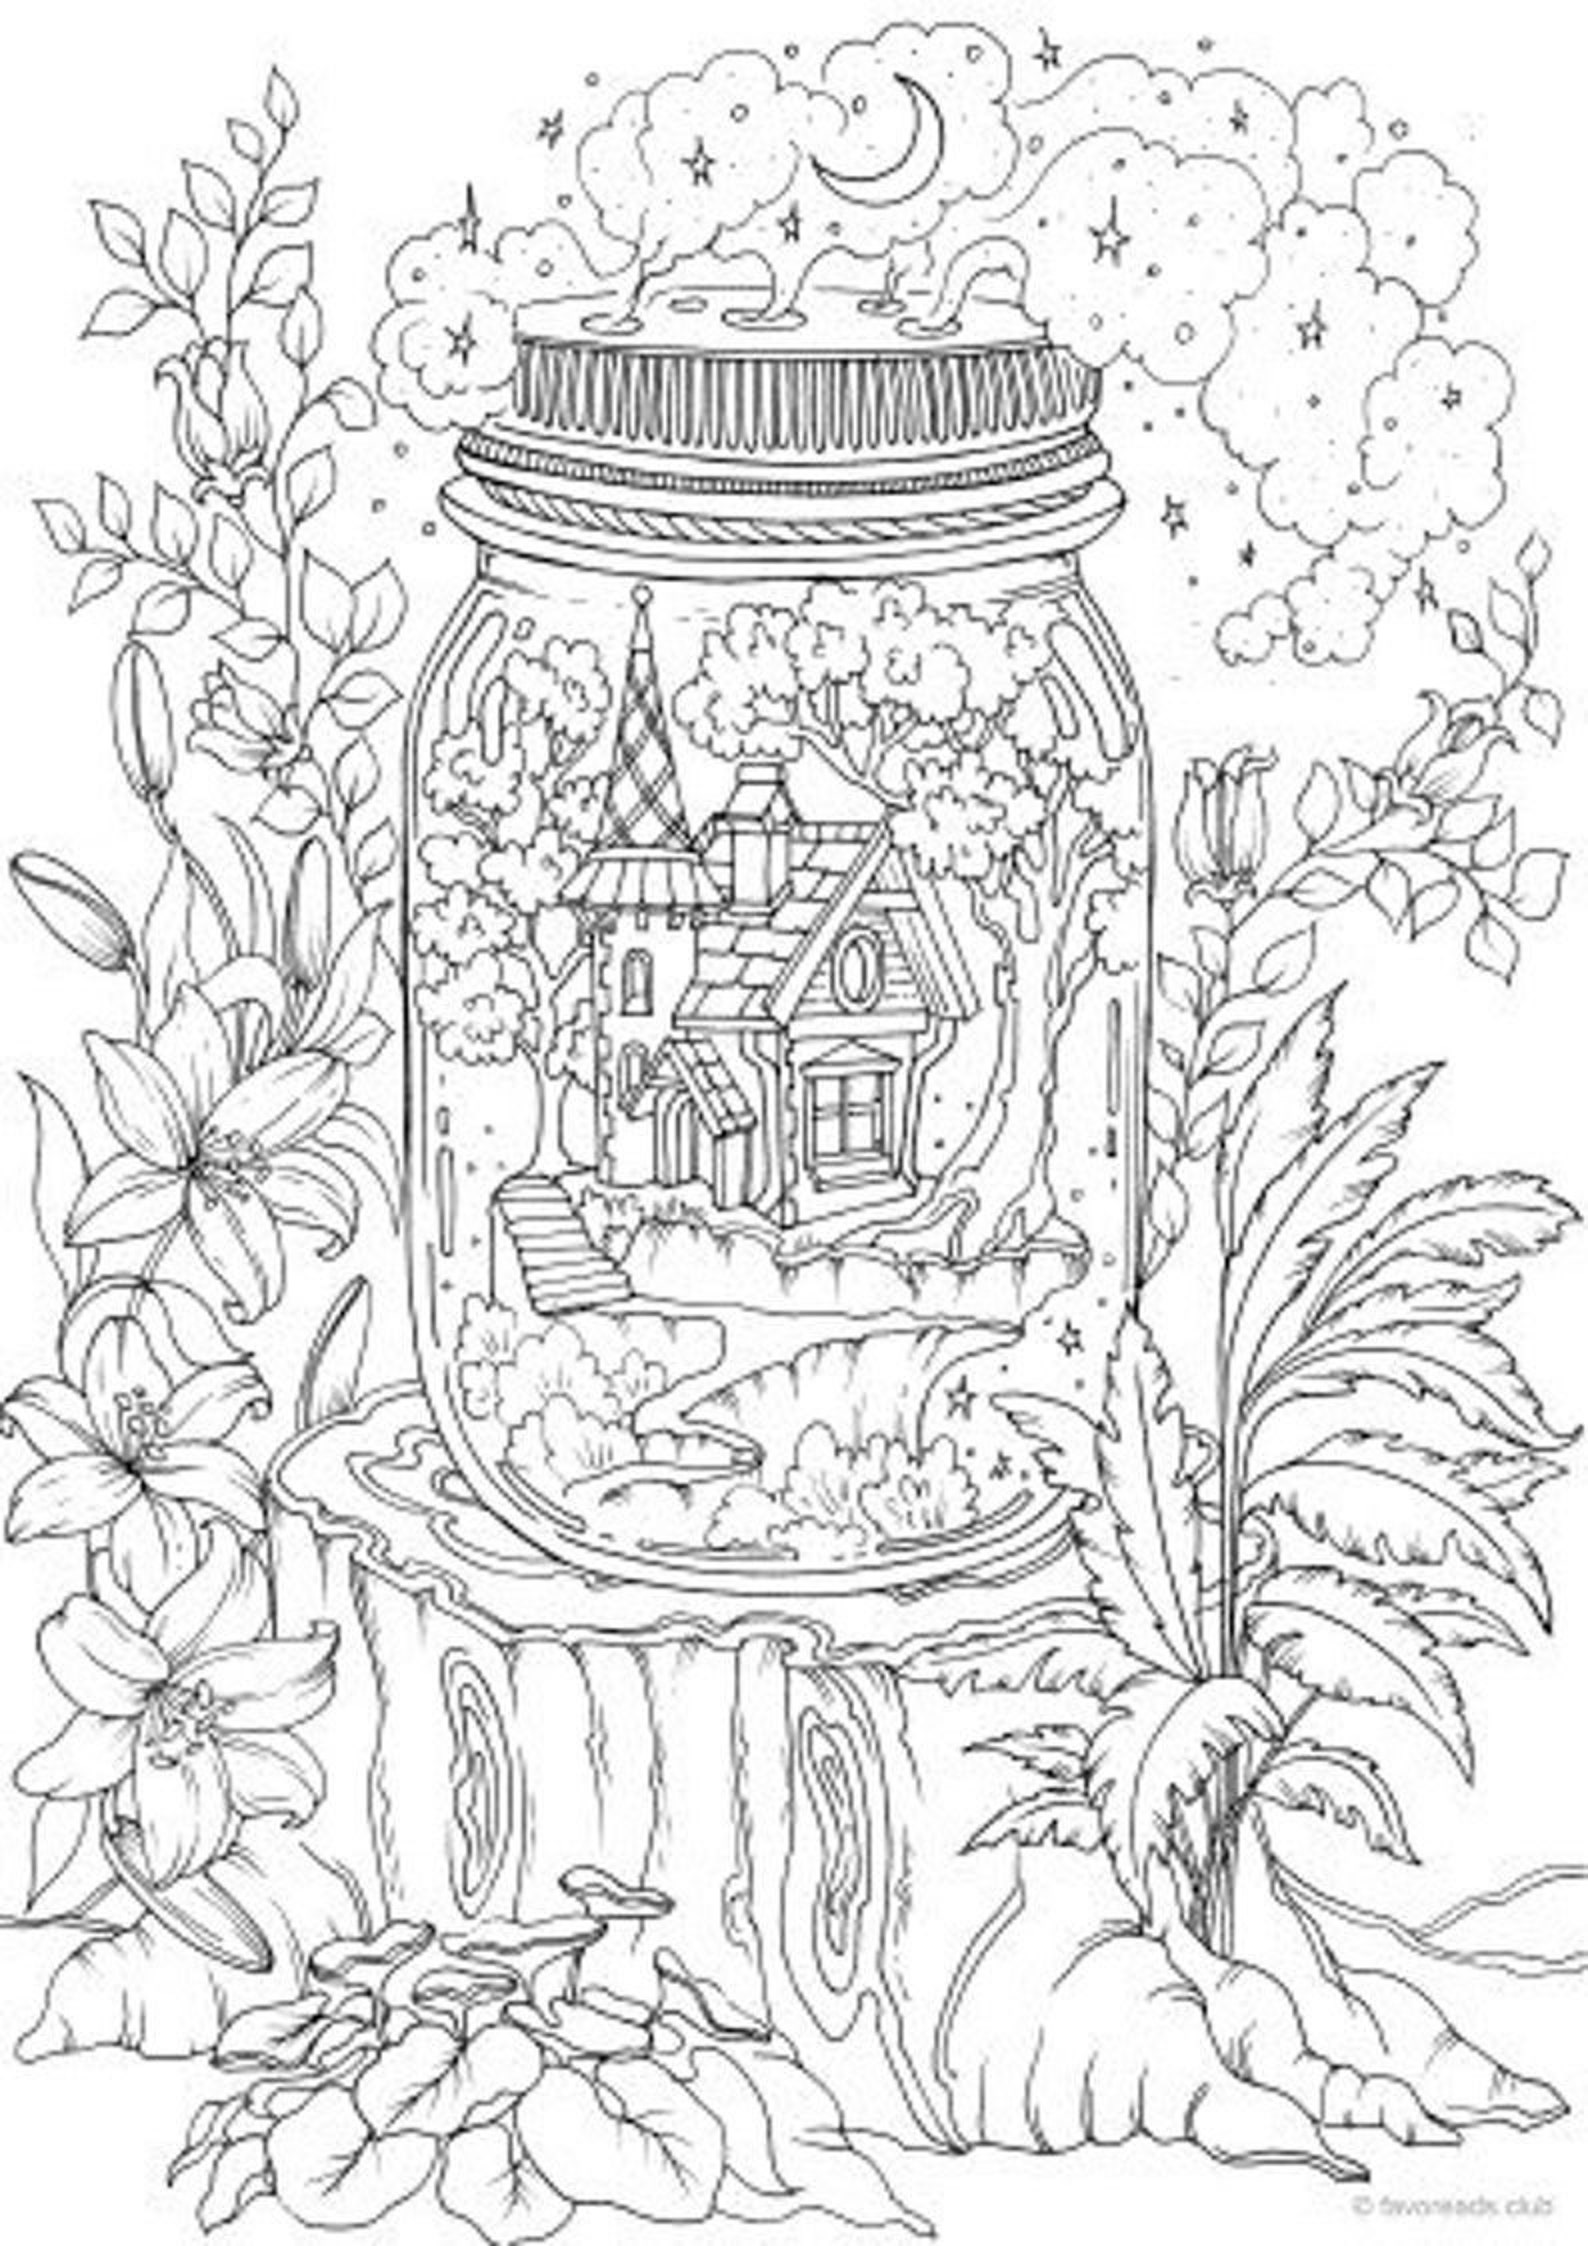 coloring-pages-for-adults-etsy